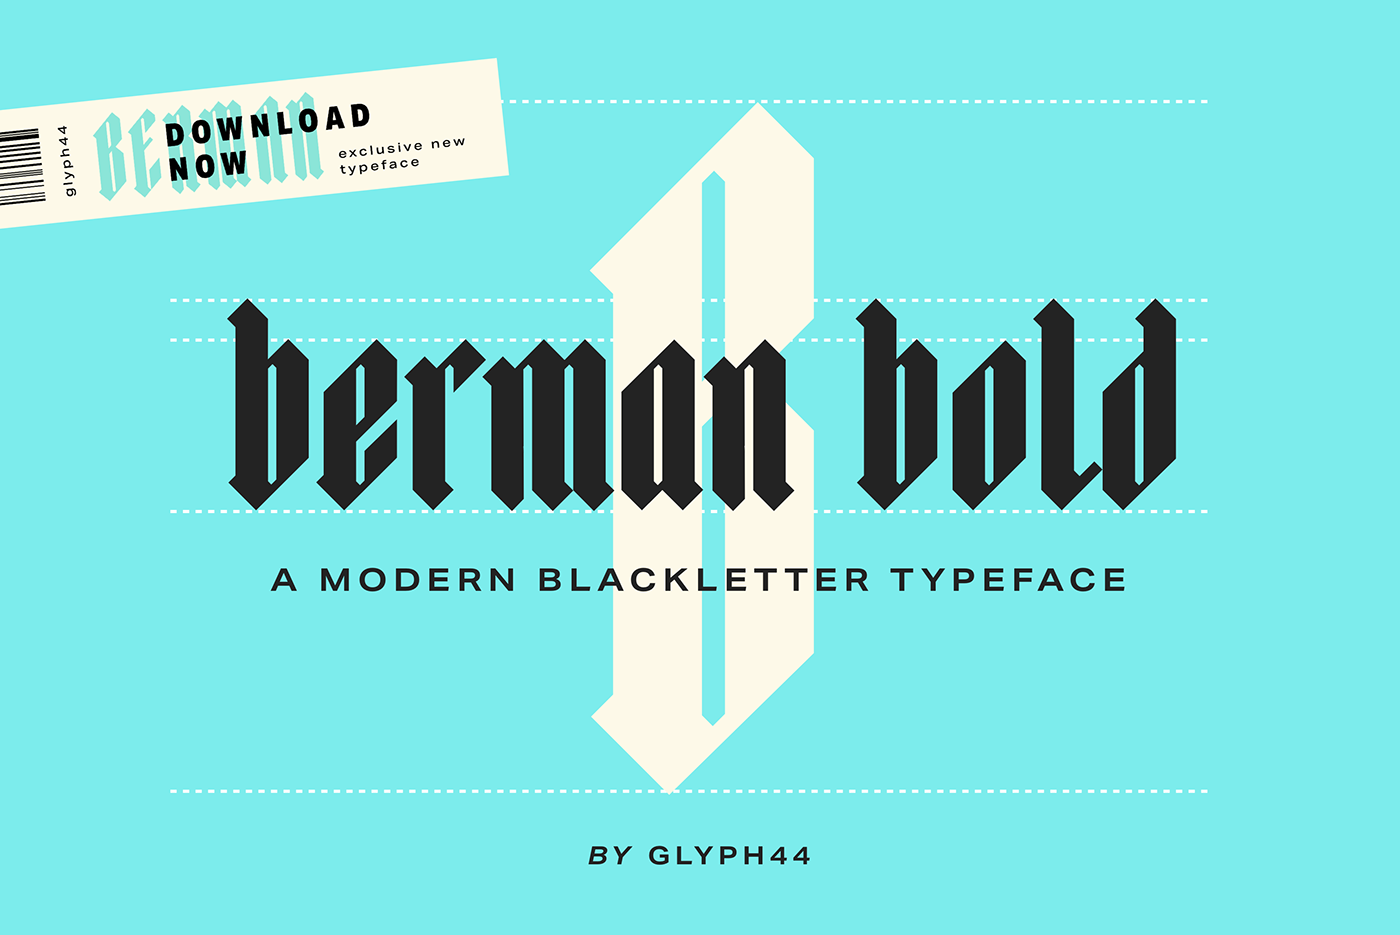 font Typeface Blackletter download bold Display modern type free typography  